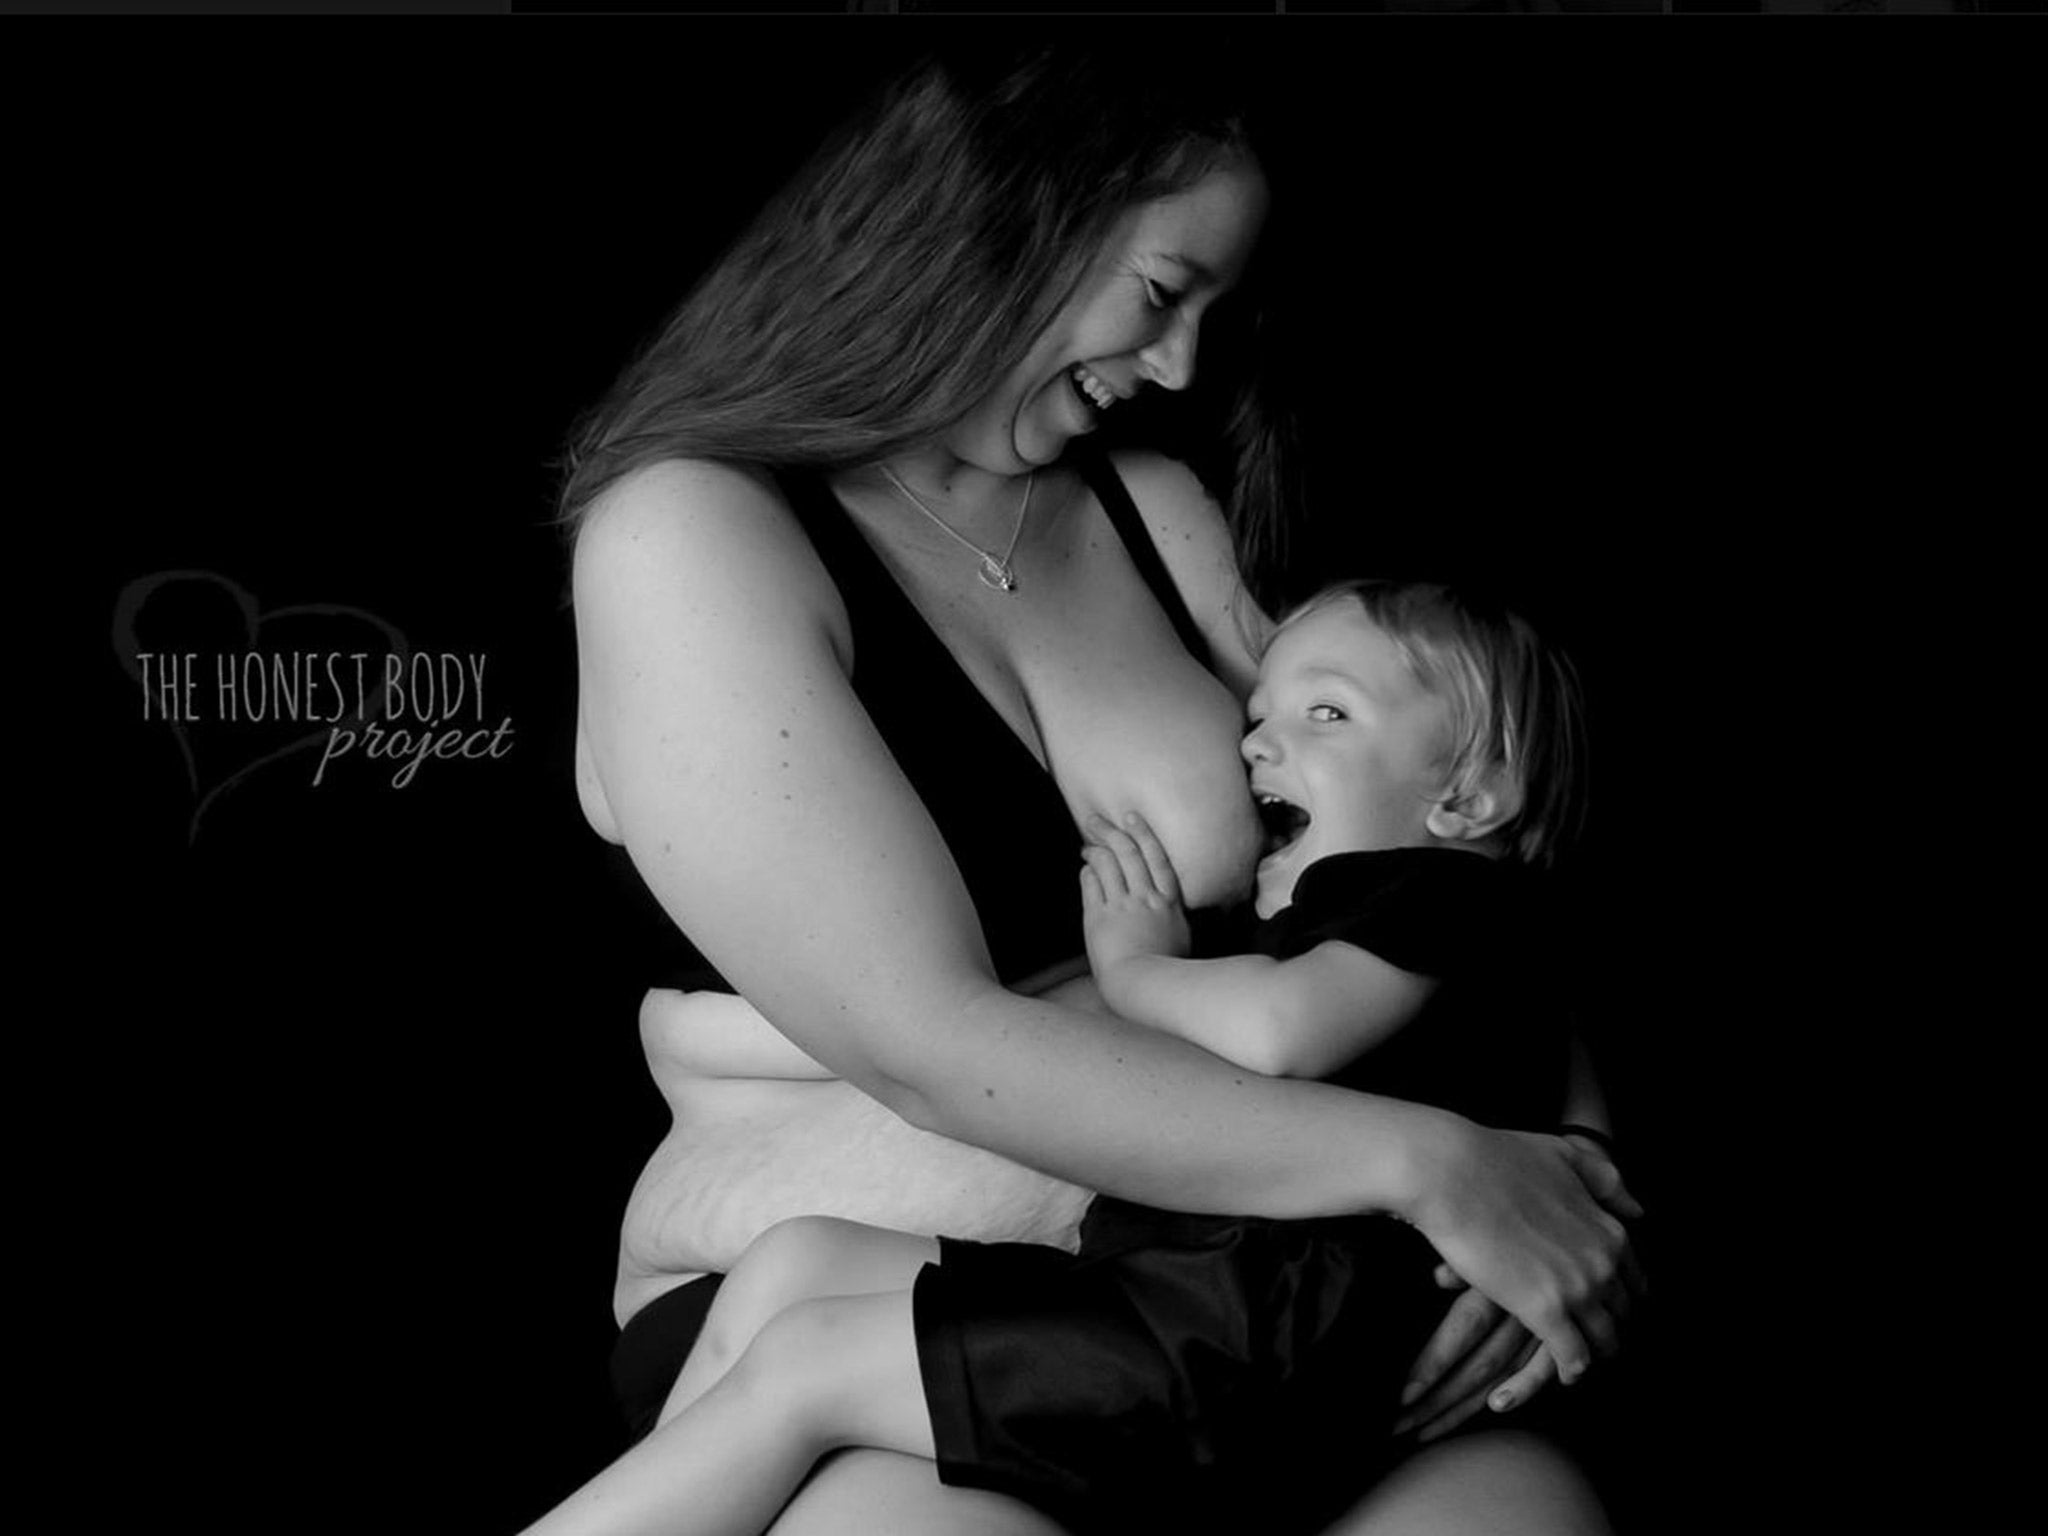 'I hope that I have done enough ... for my sons to be the best breastfeeding supportive dads, or friend they can be.' (The Honest Body Project by Natalie McCain)